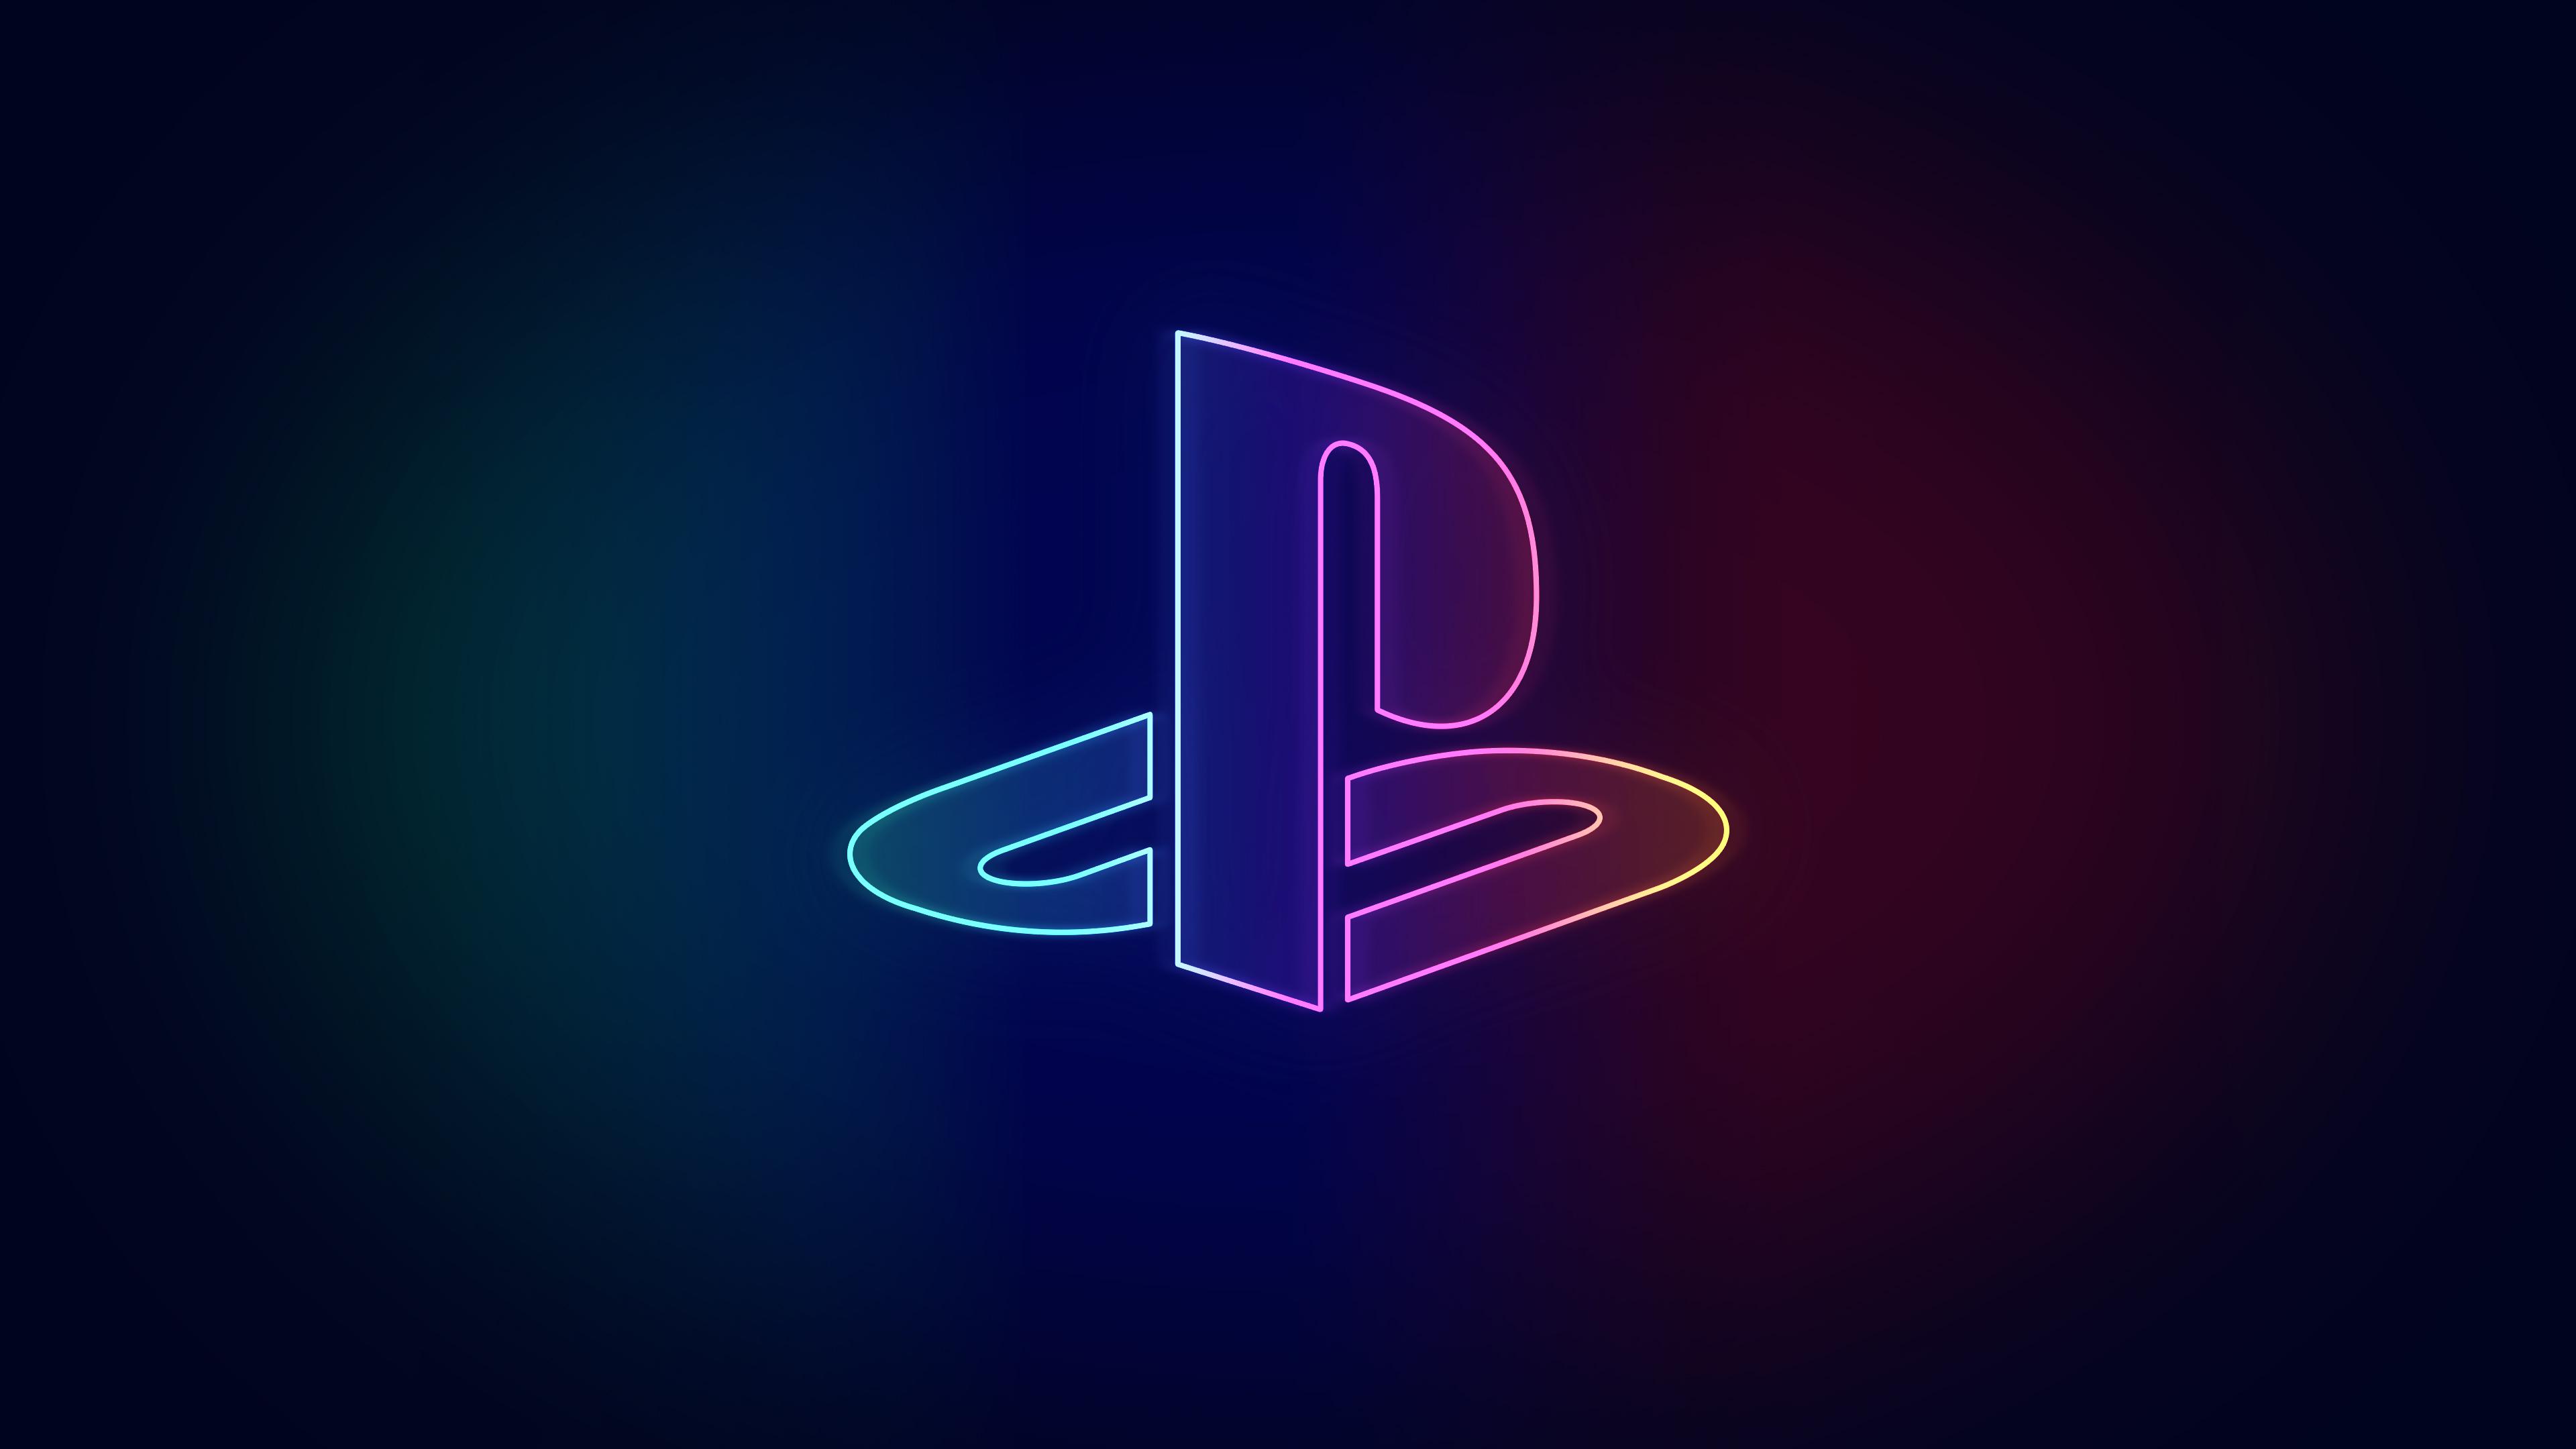 Neon Playstation wallpaper [3840 x 2160], PlayStation, Video game console, Gaming